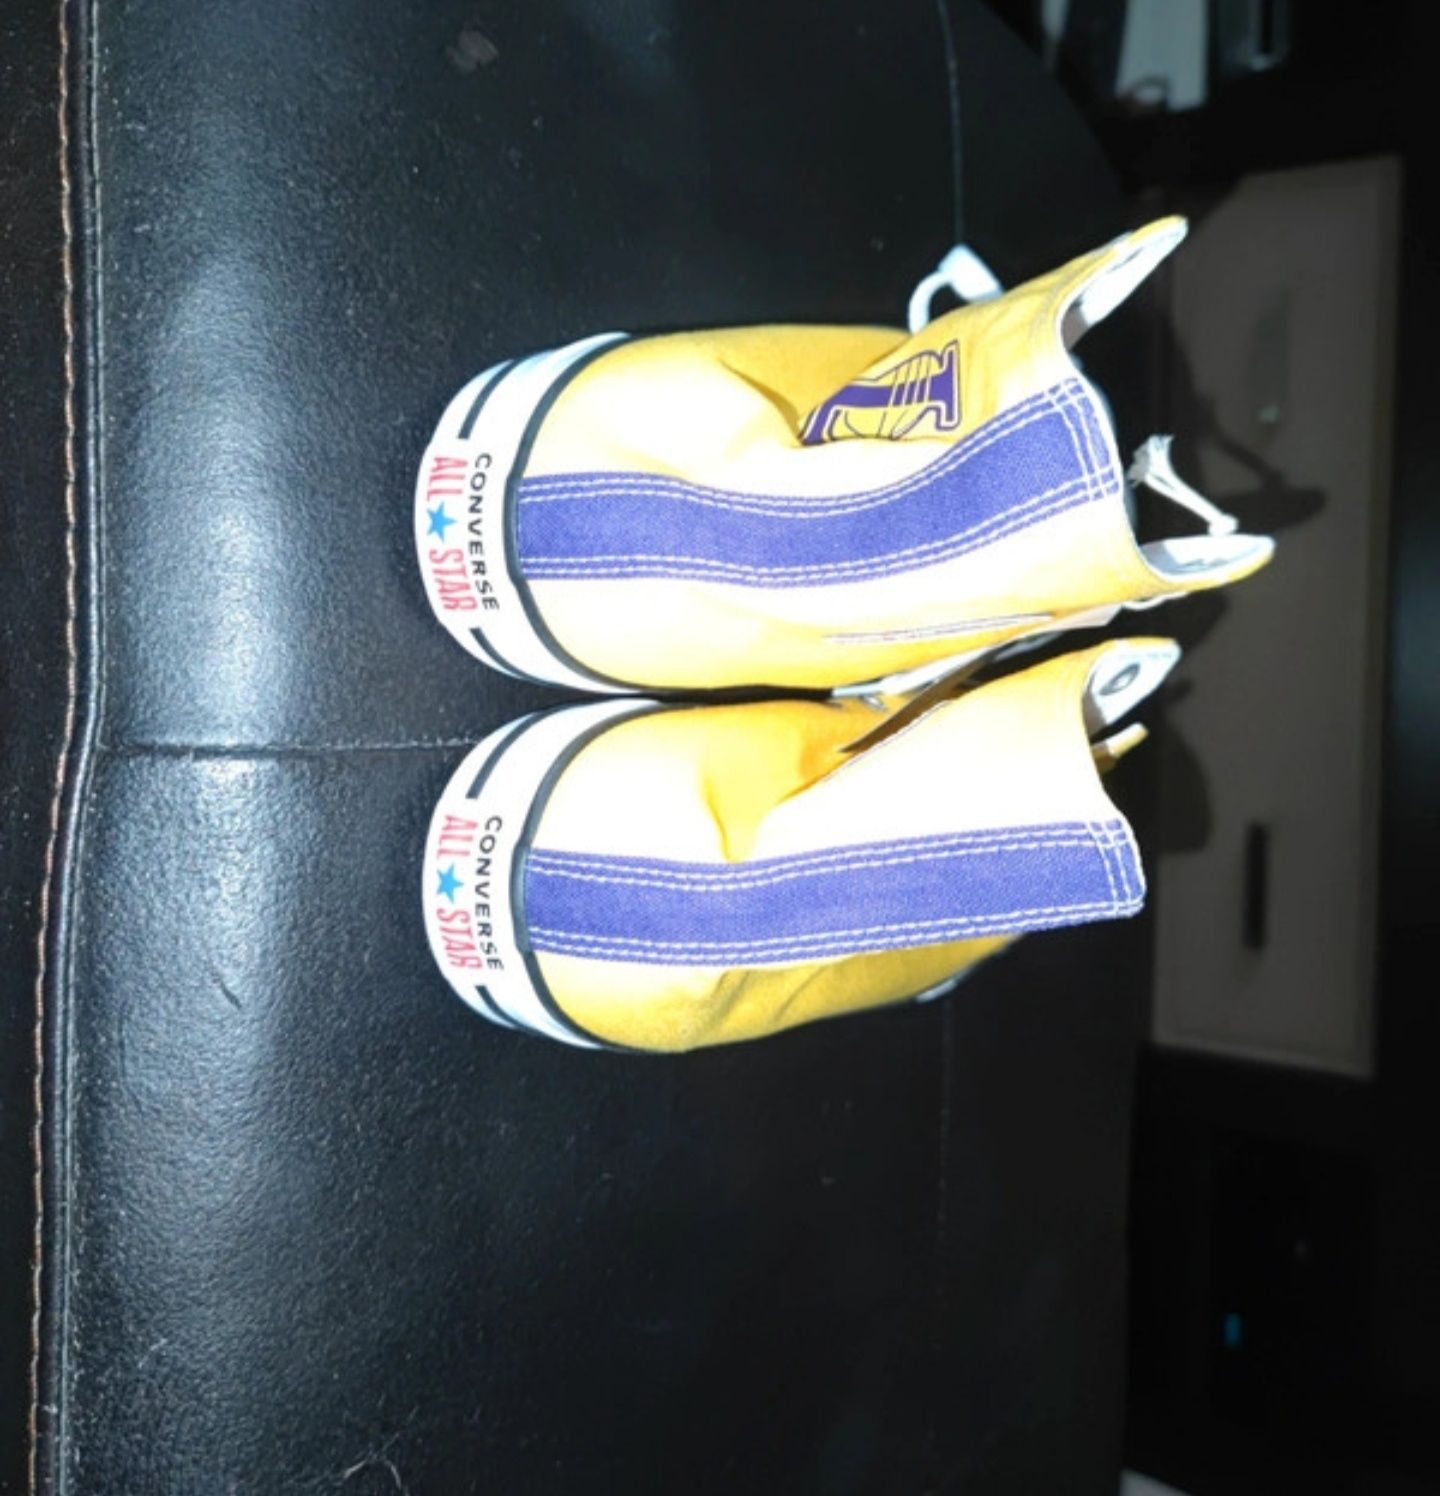 Converse All Stars Lakers NBA limited edition